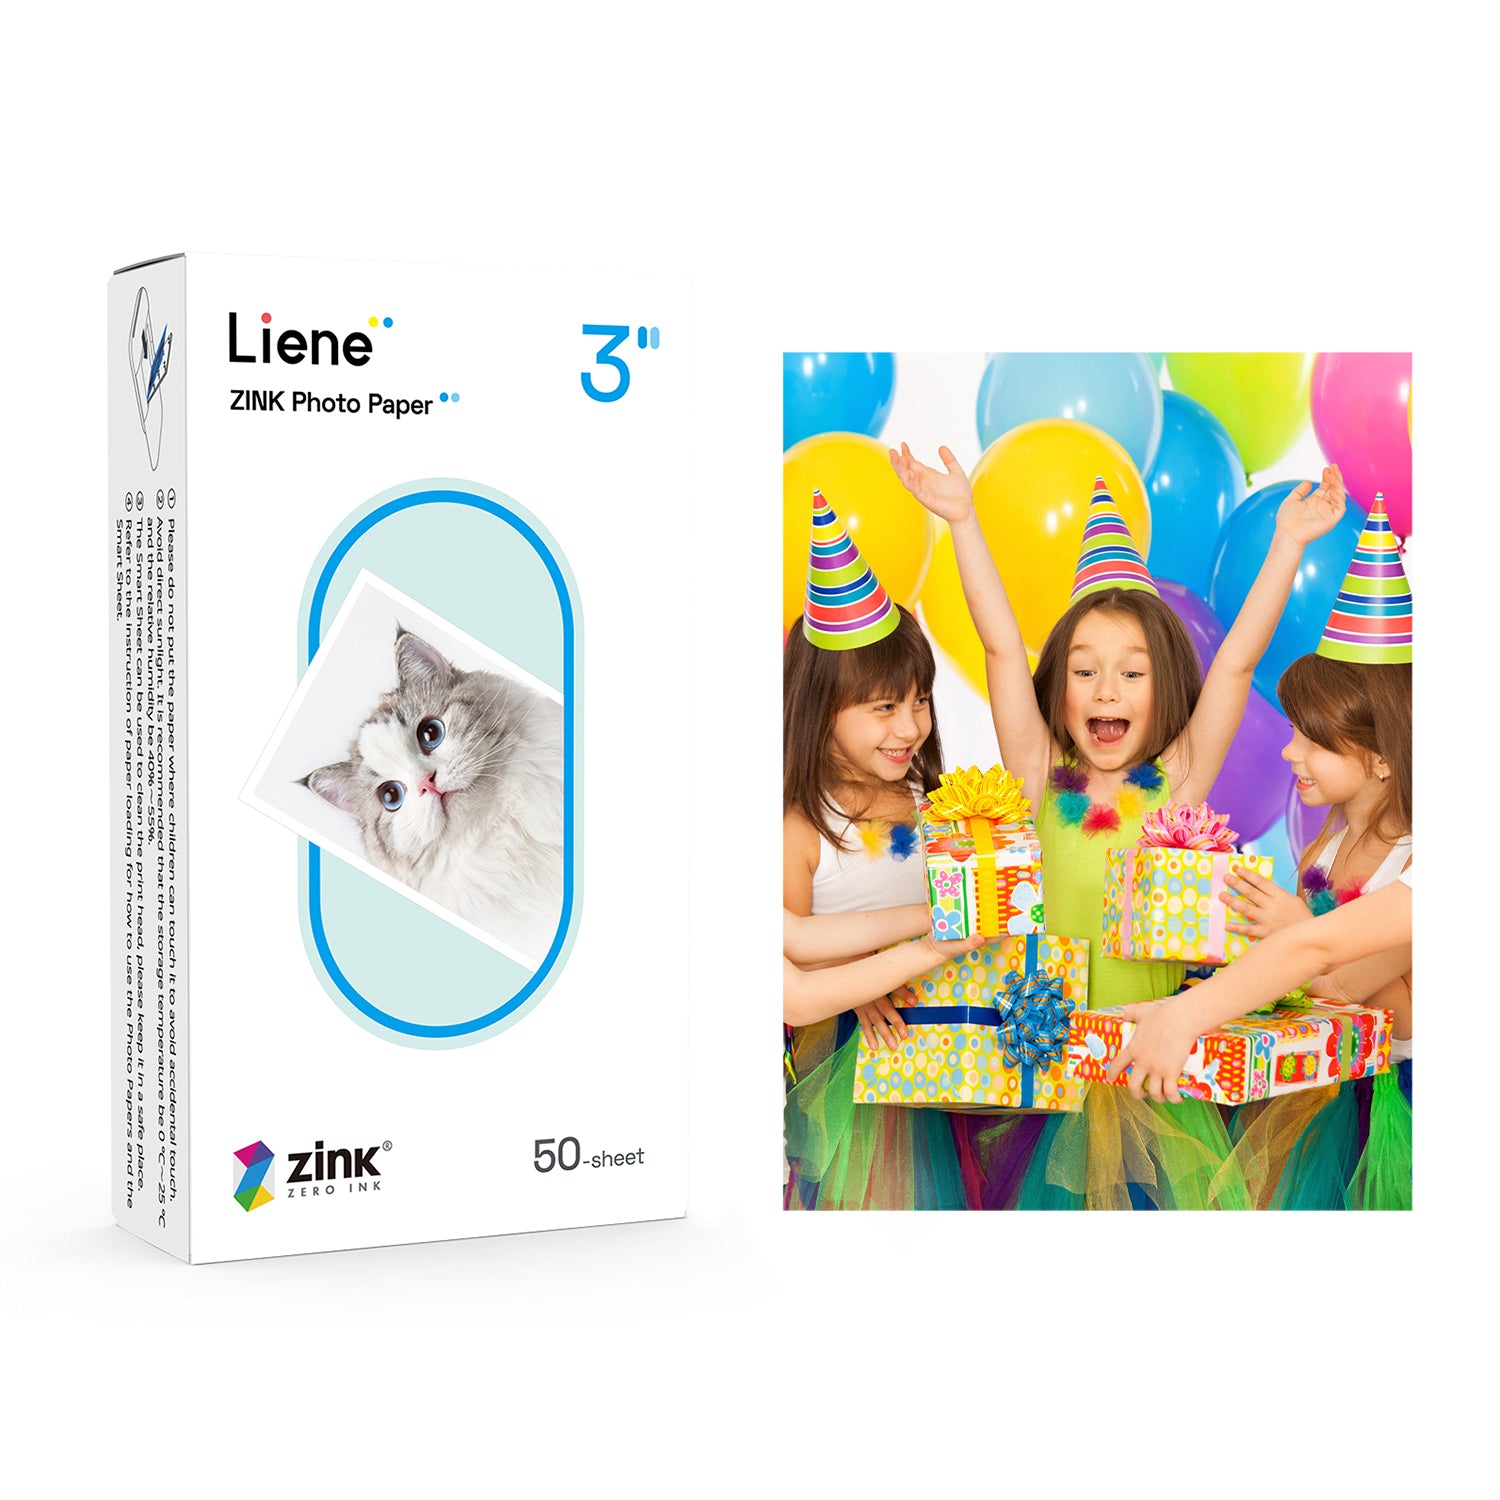 zink photo papers